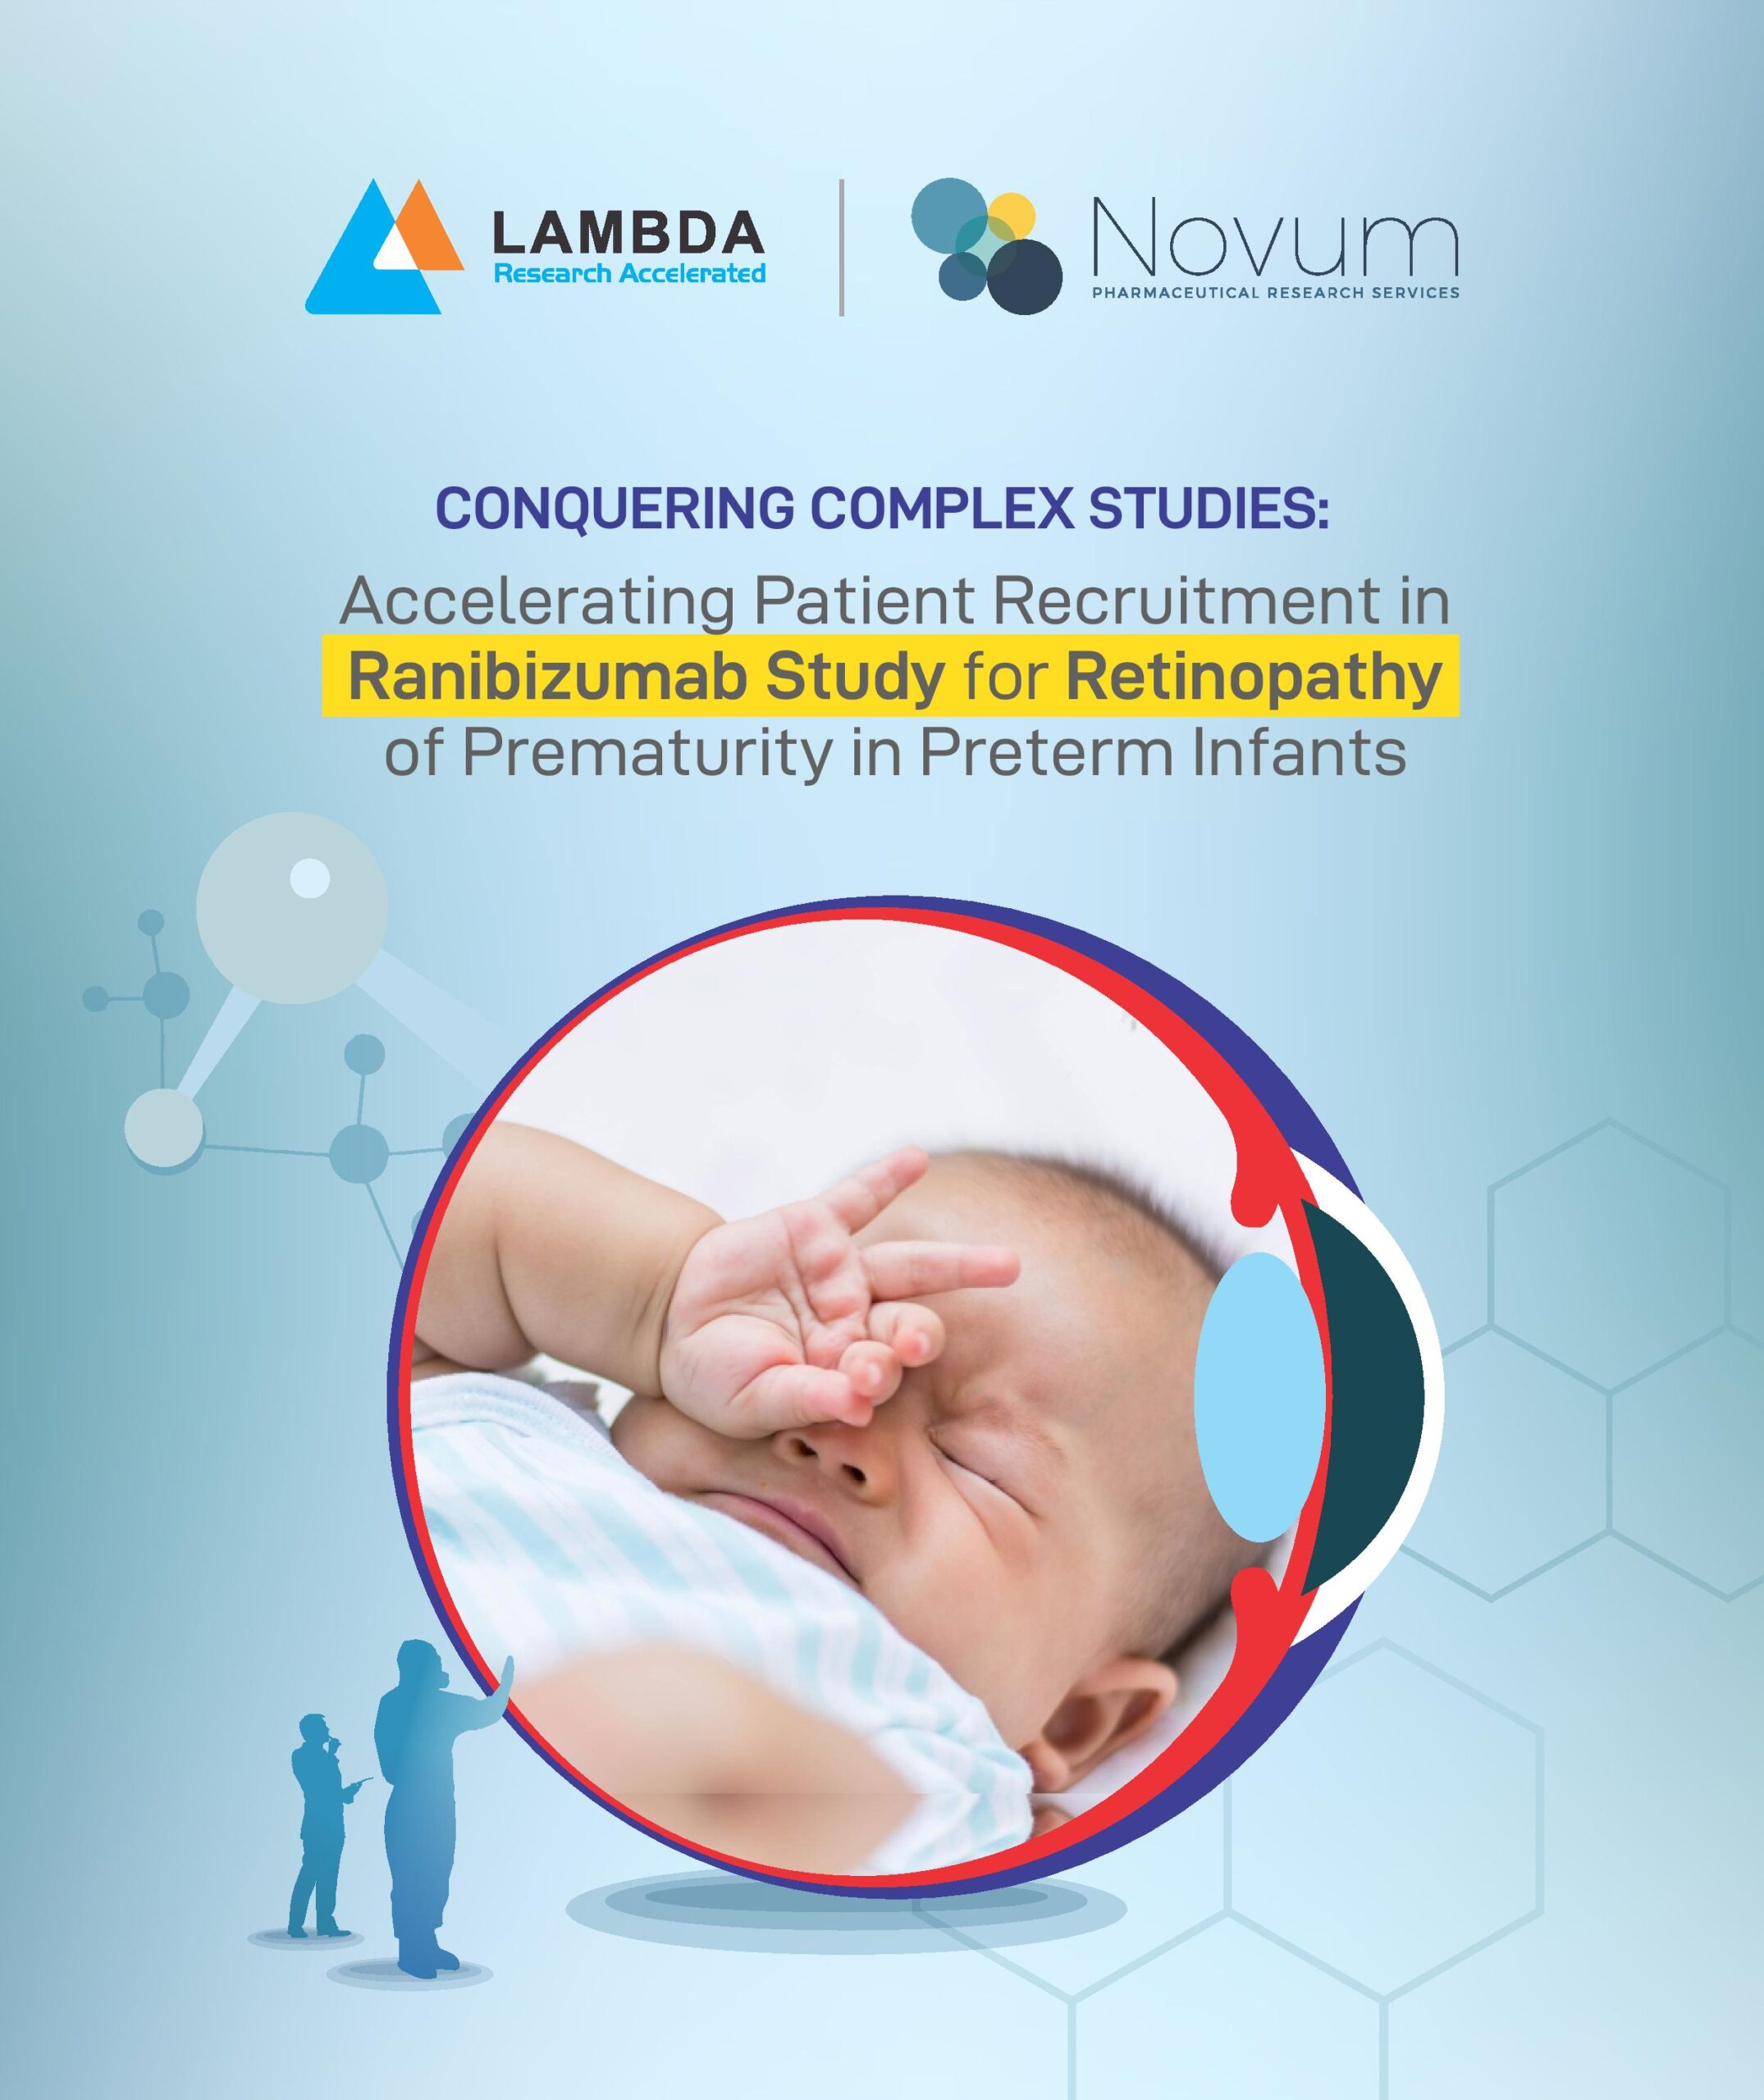 You are currently viewing Accelerating Patient Recruitment in Ranibizumab Study for Retinopathy of Prematurity in Preterm Infants